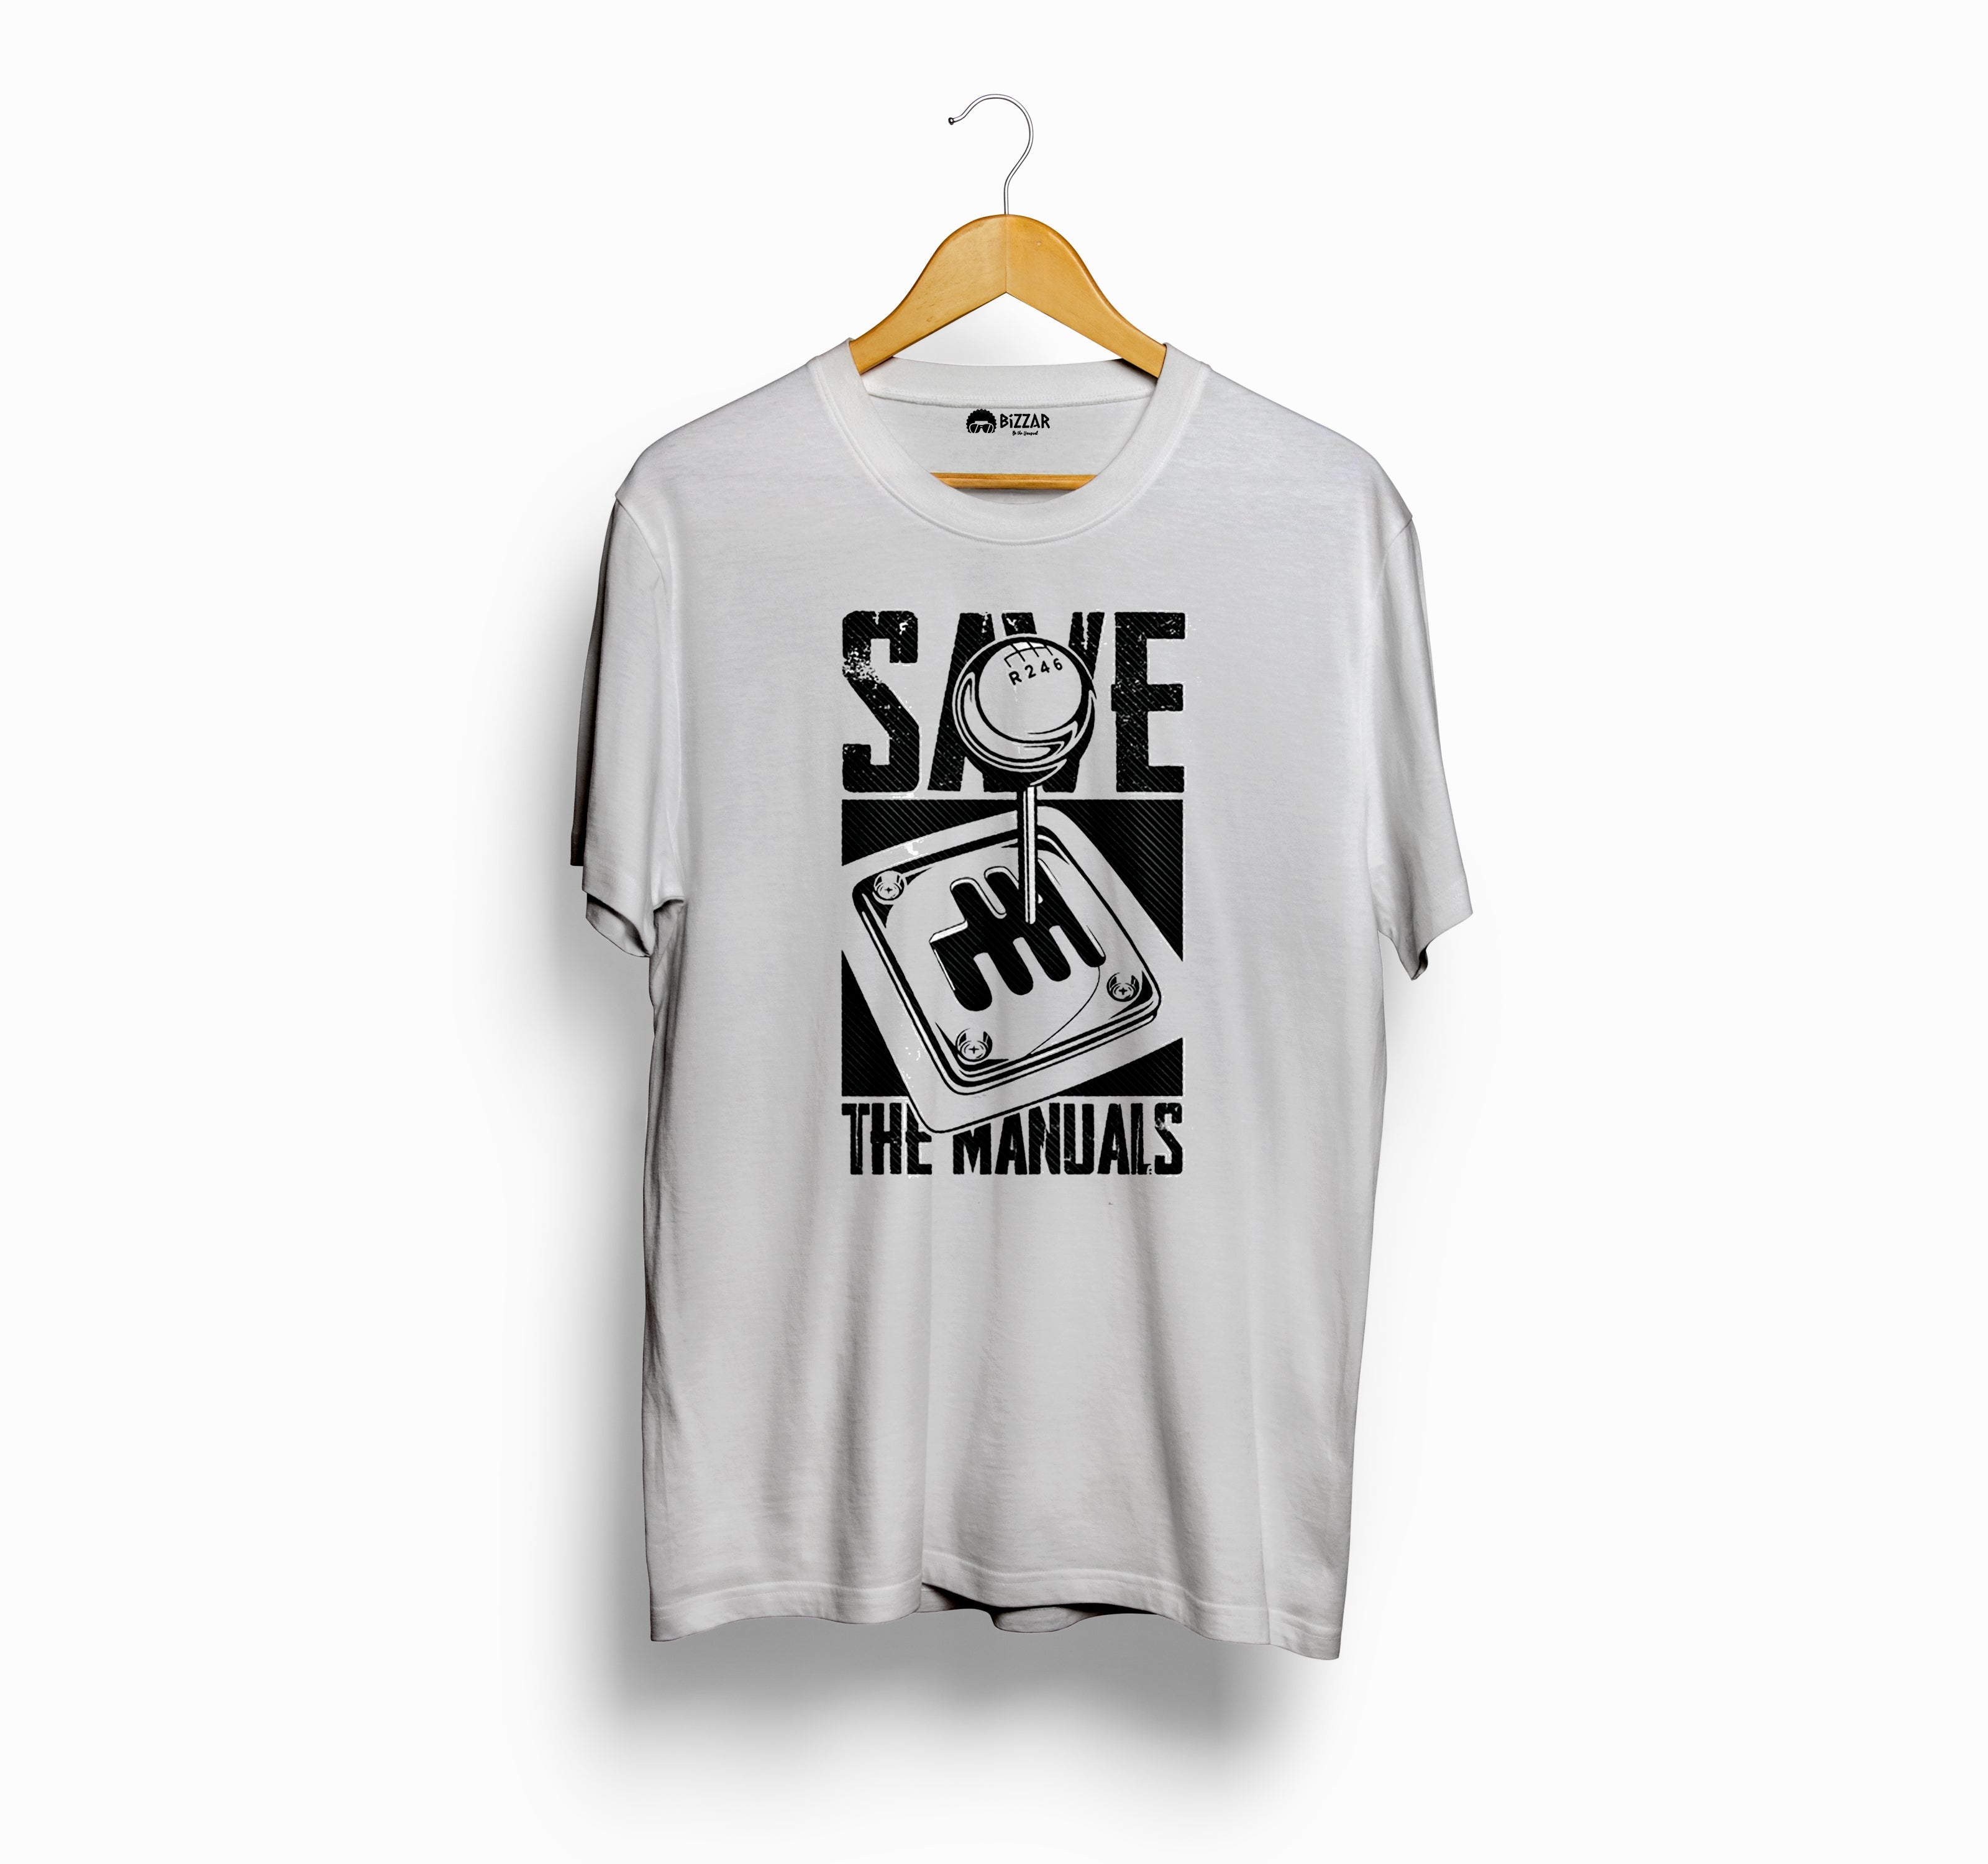 Bizzar's Save the Manuals White T-Shirt